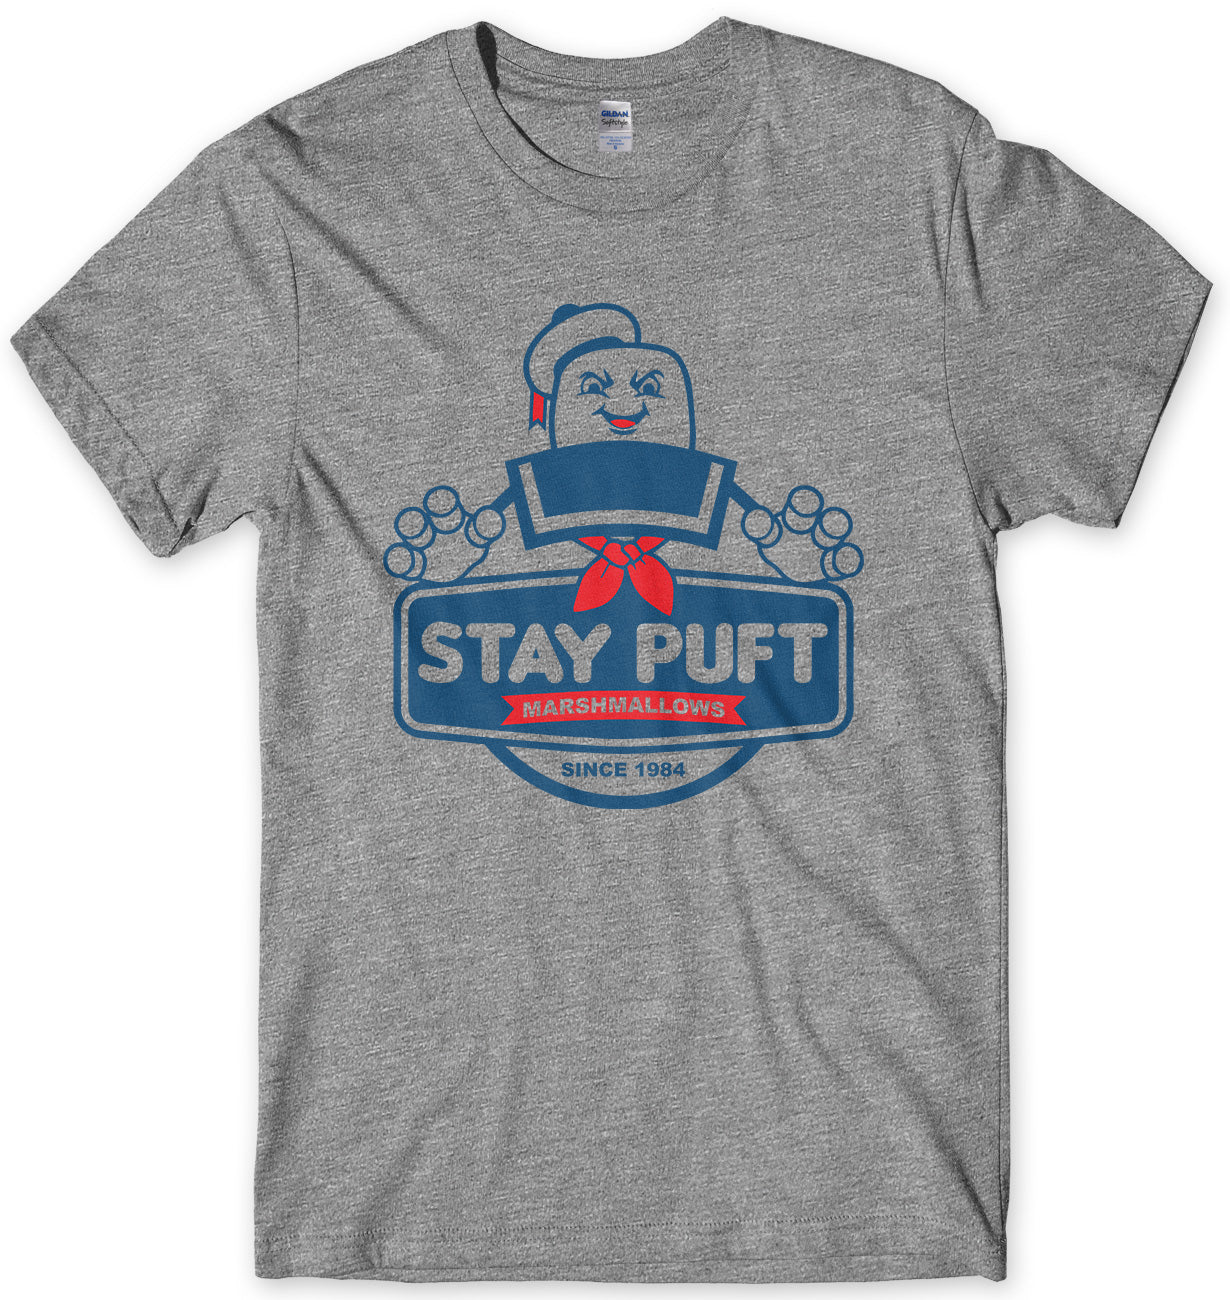 STAY PUFT MARSHMALLOW MAN - INSPIRED BY GHOSTBUSTERS MENS UNISEX T-SHIRT